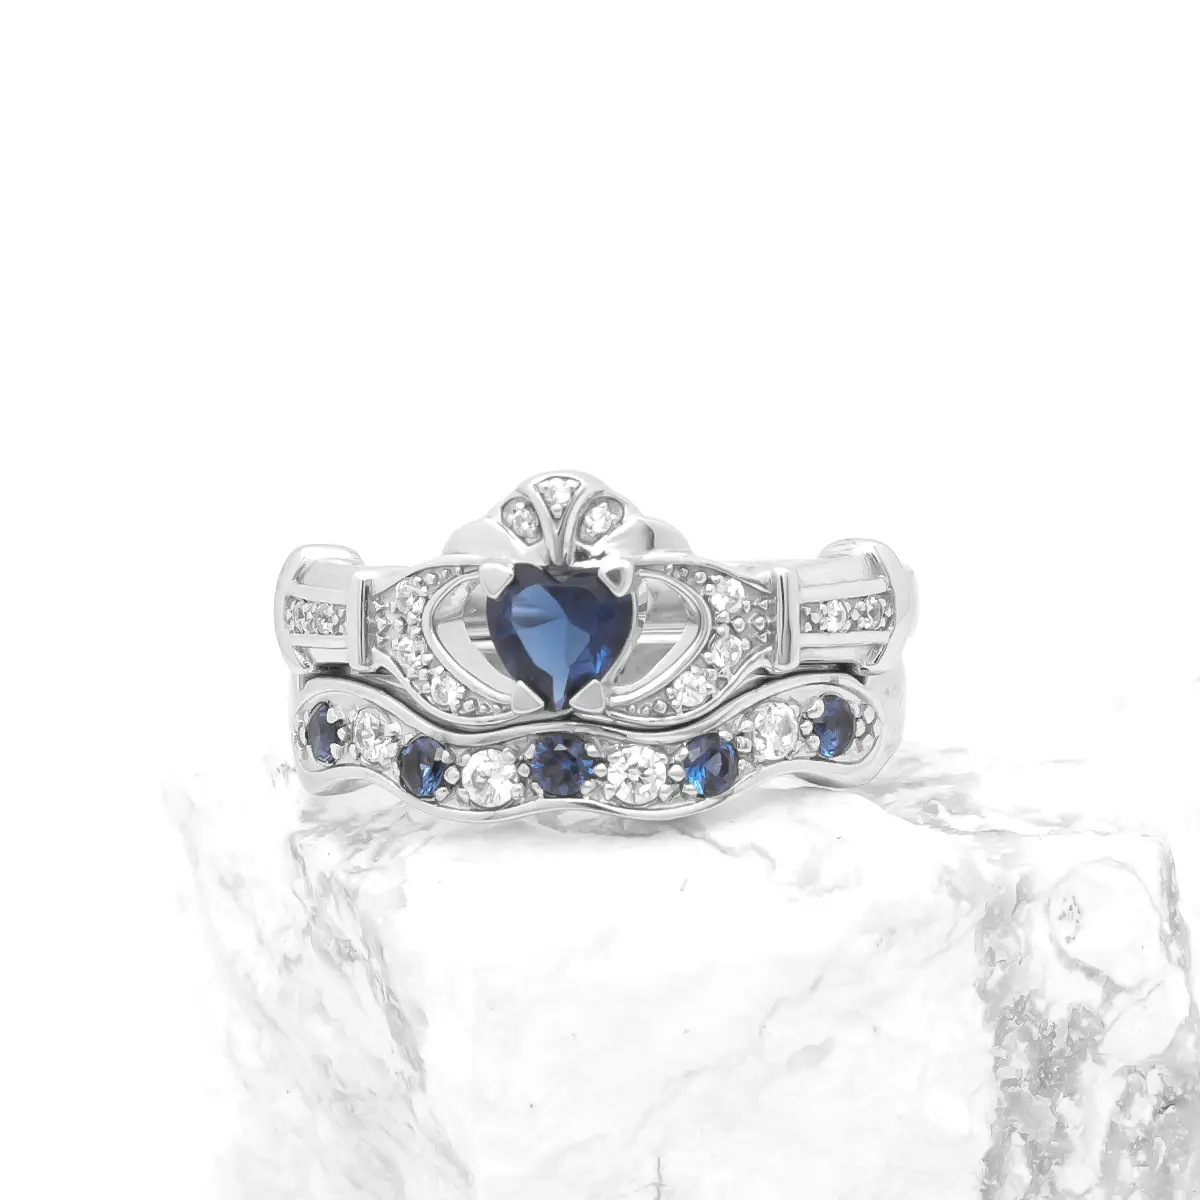 White Gold Sapphire and Diamond Claddagh Bridal Ring Set